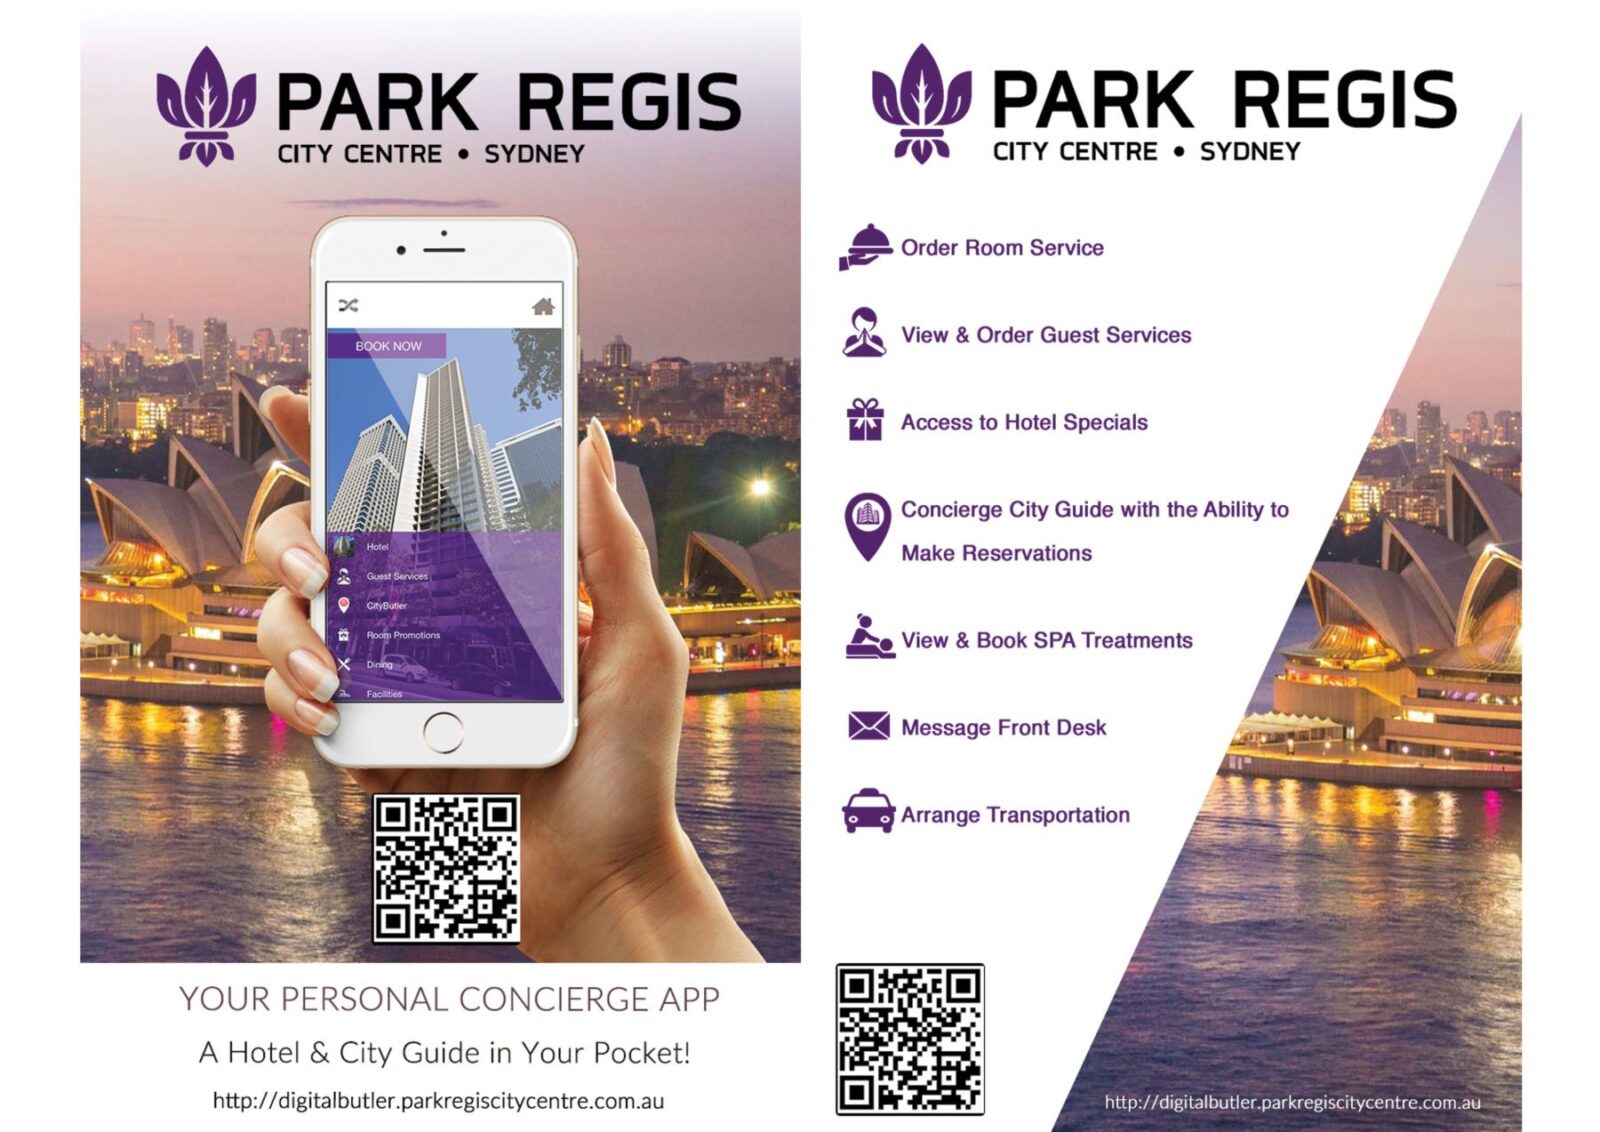 New Park Regis Travel app brings the best of Sydney to guests’ pockets